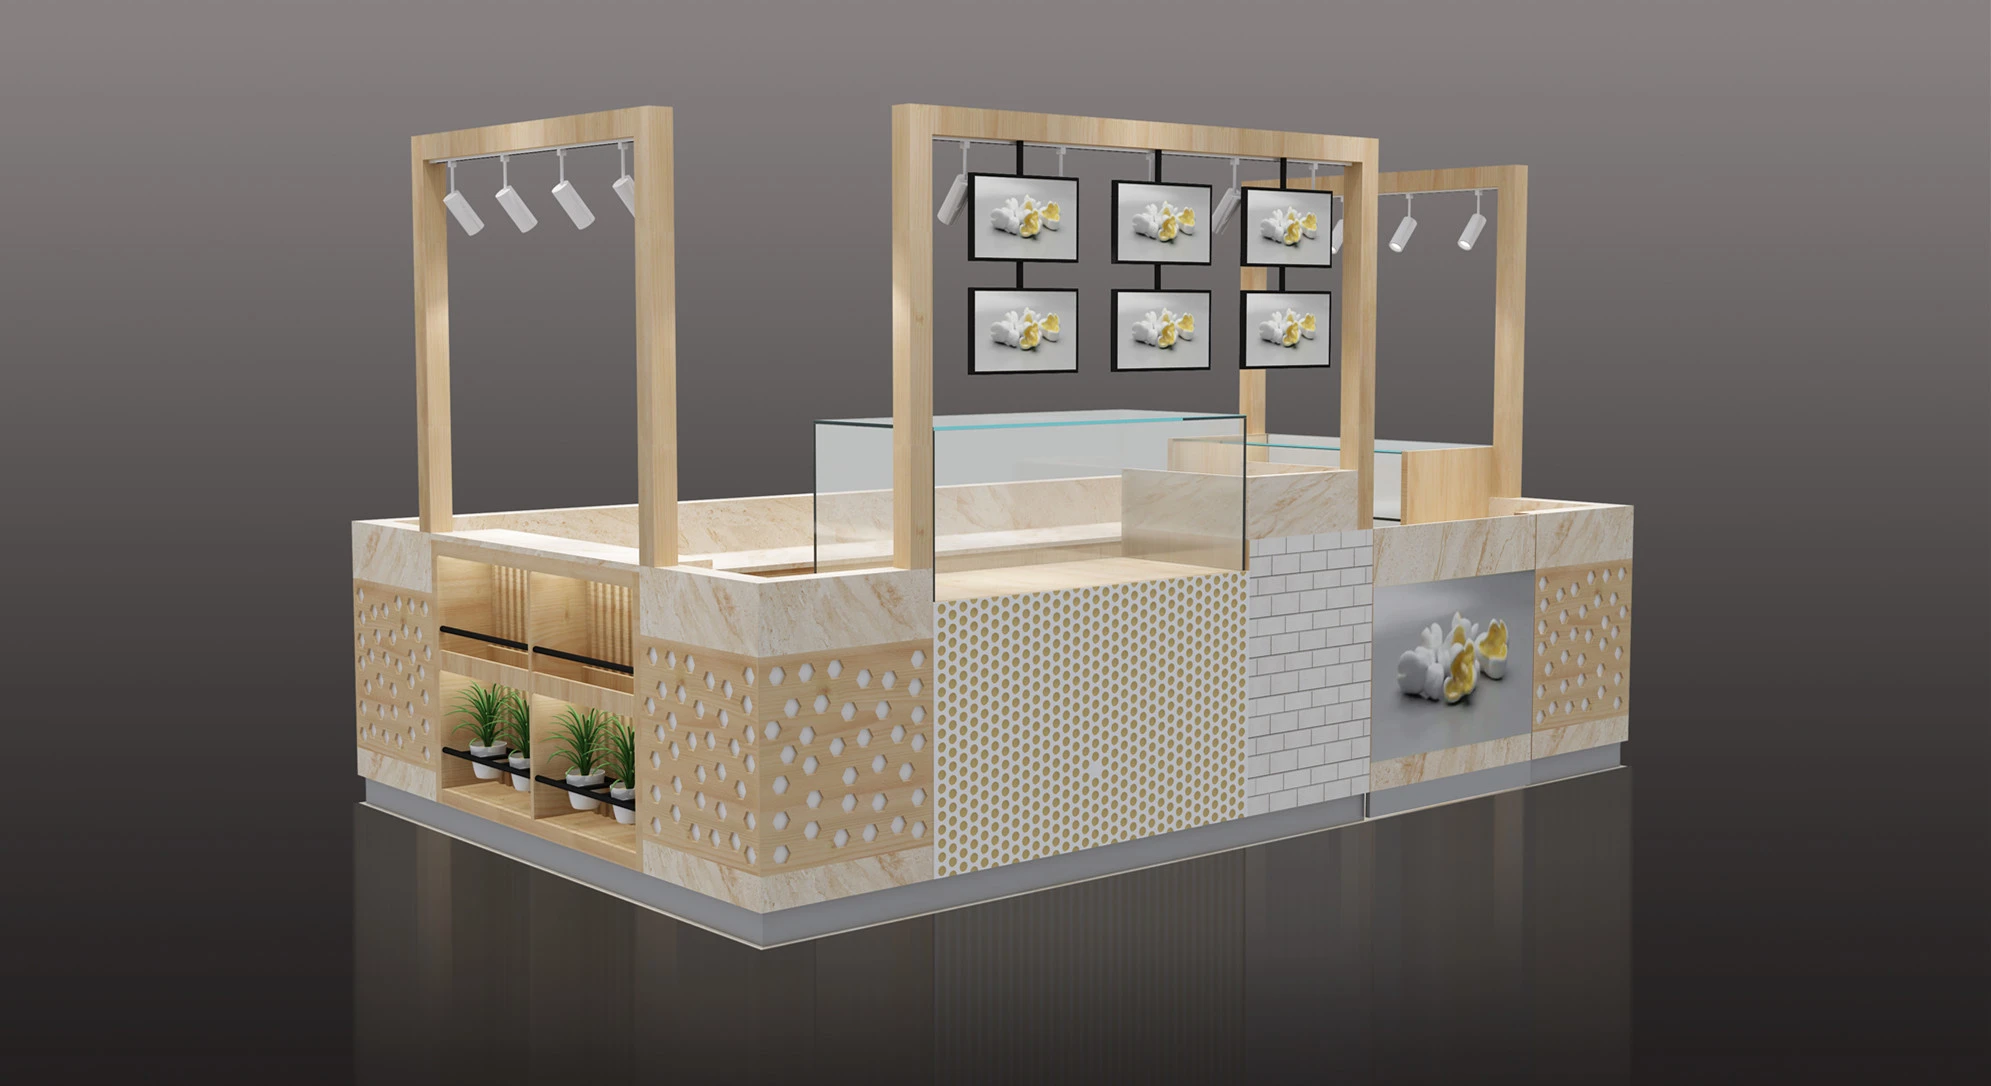 Shopping Mall Airport Fresh Fruit Juice Bar Coffee Shop Design With Store Furniture Counter Kiosk for Food